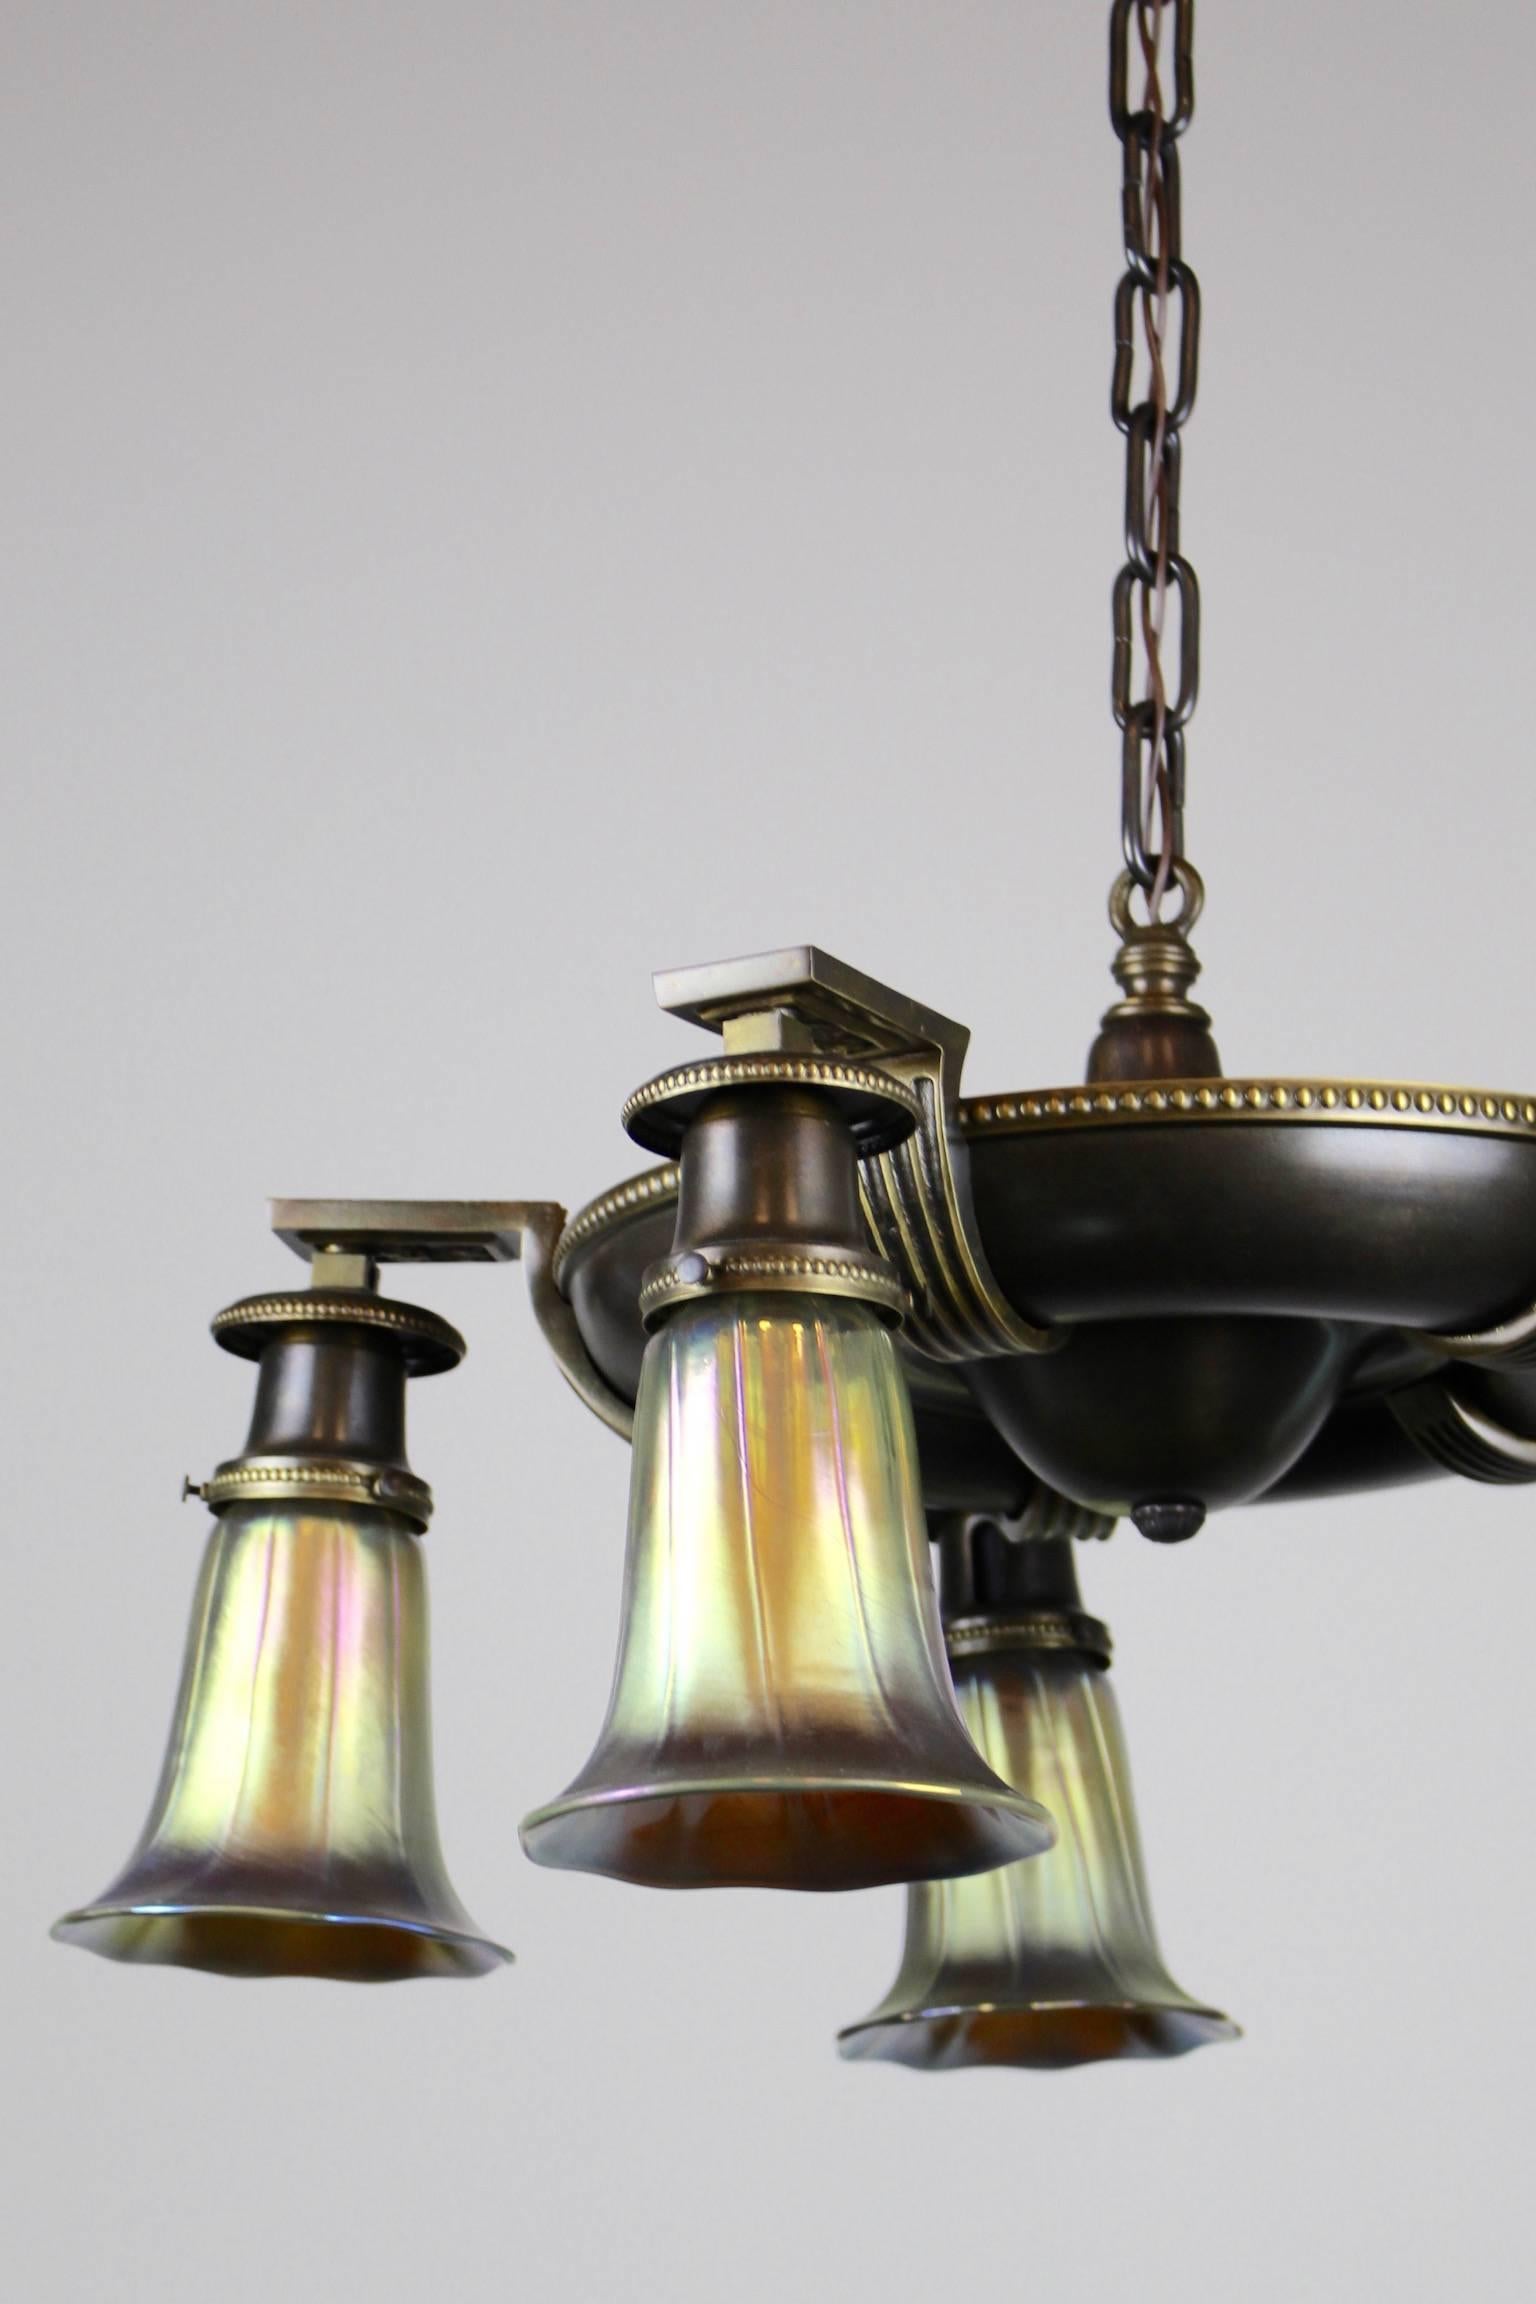 Early 20th Century Classical Revival Fixture by Shapiro & Aronson For Sale